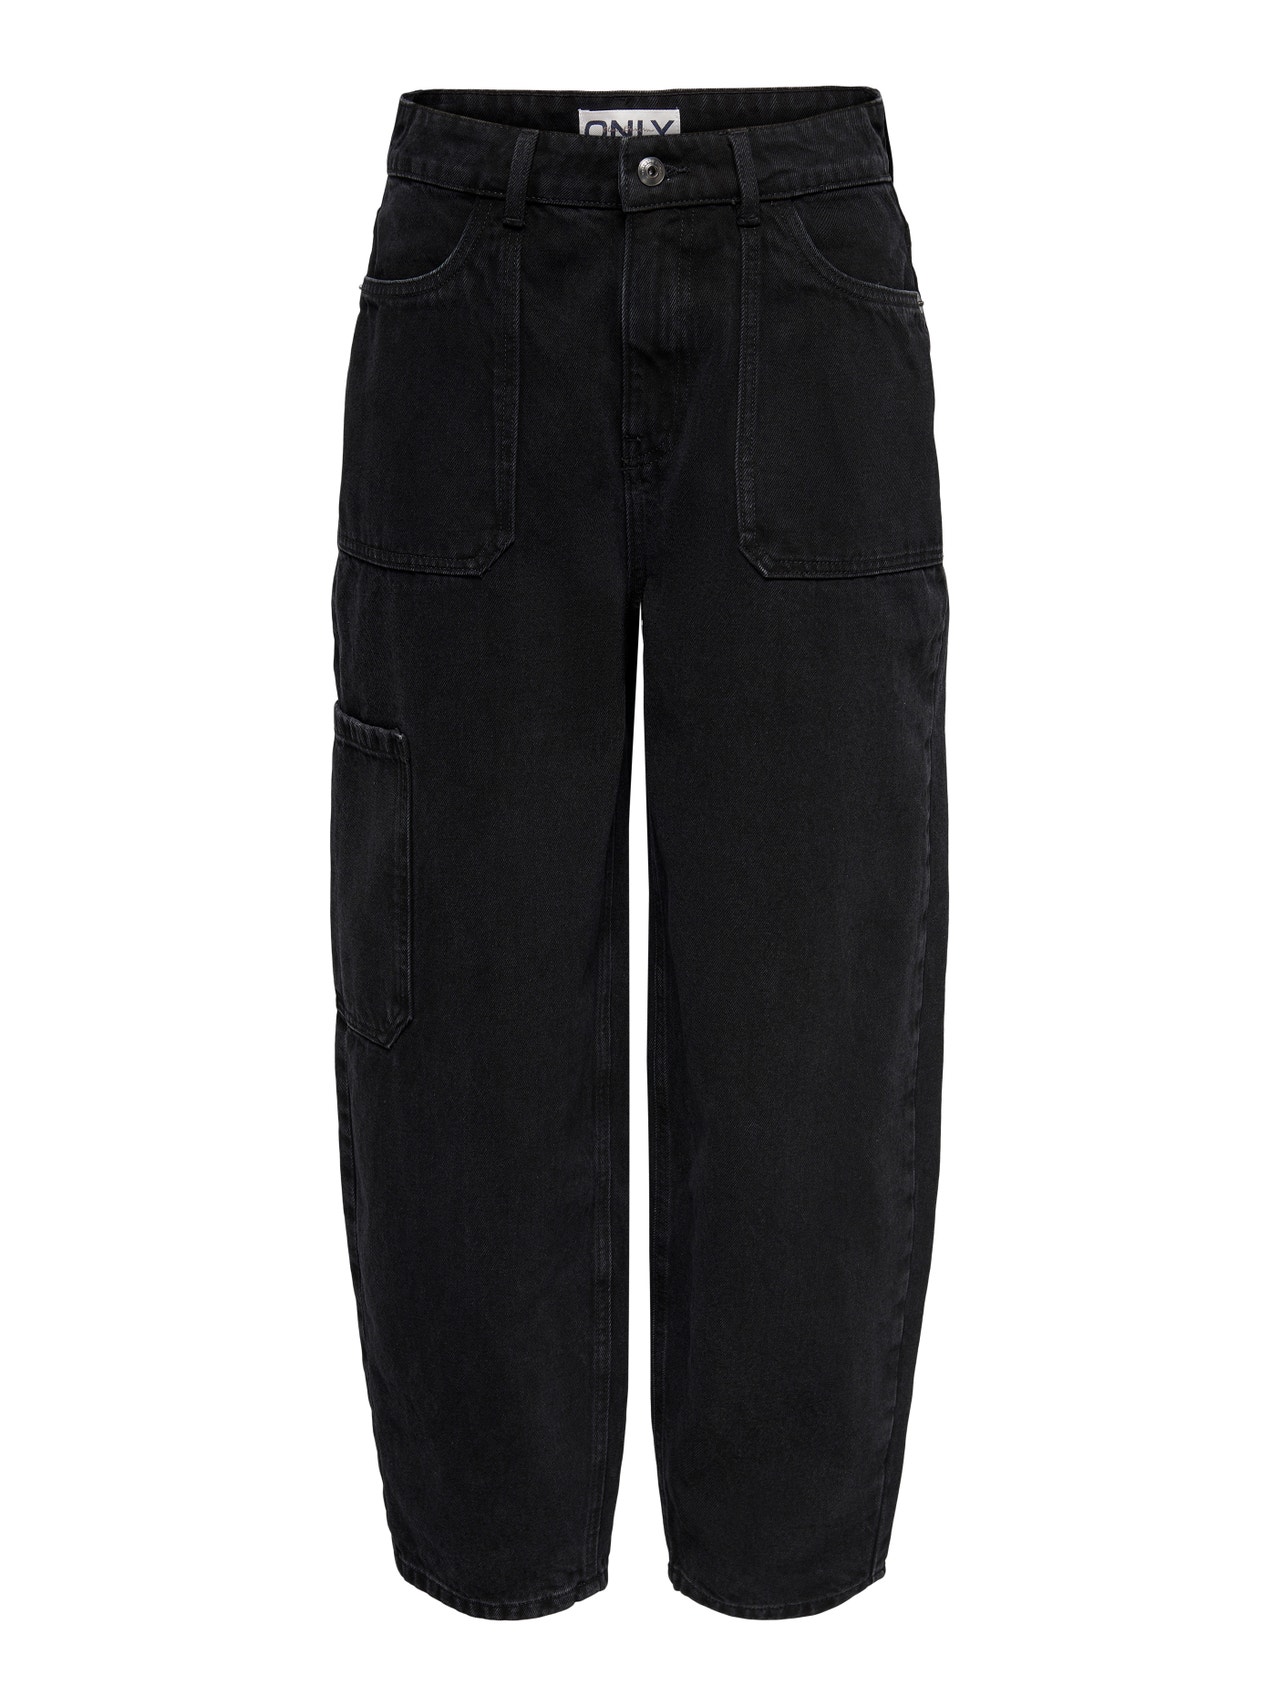 ONLY ONLMILANI MW BALLON CARGO ENKEL Loose fit jeans -Washed Black - 15278385